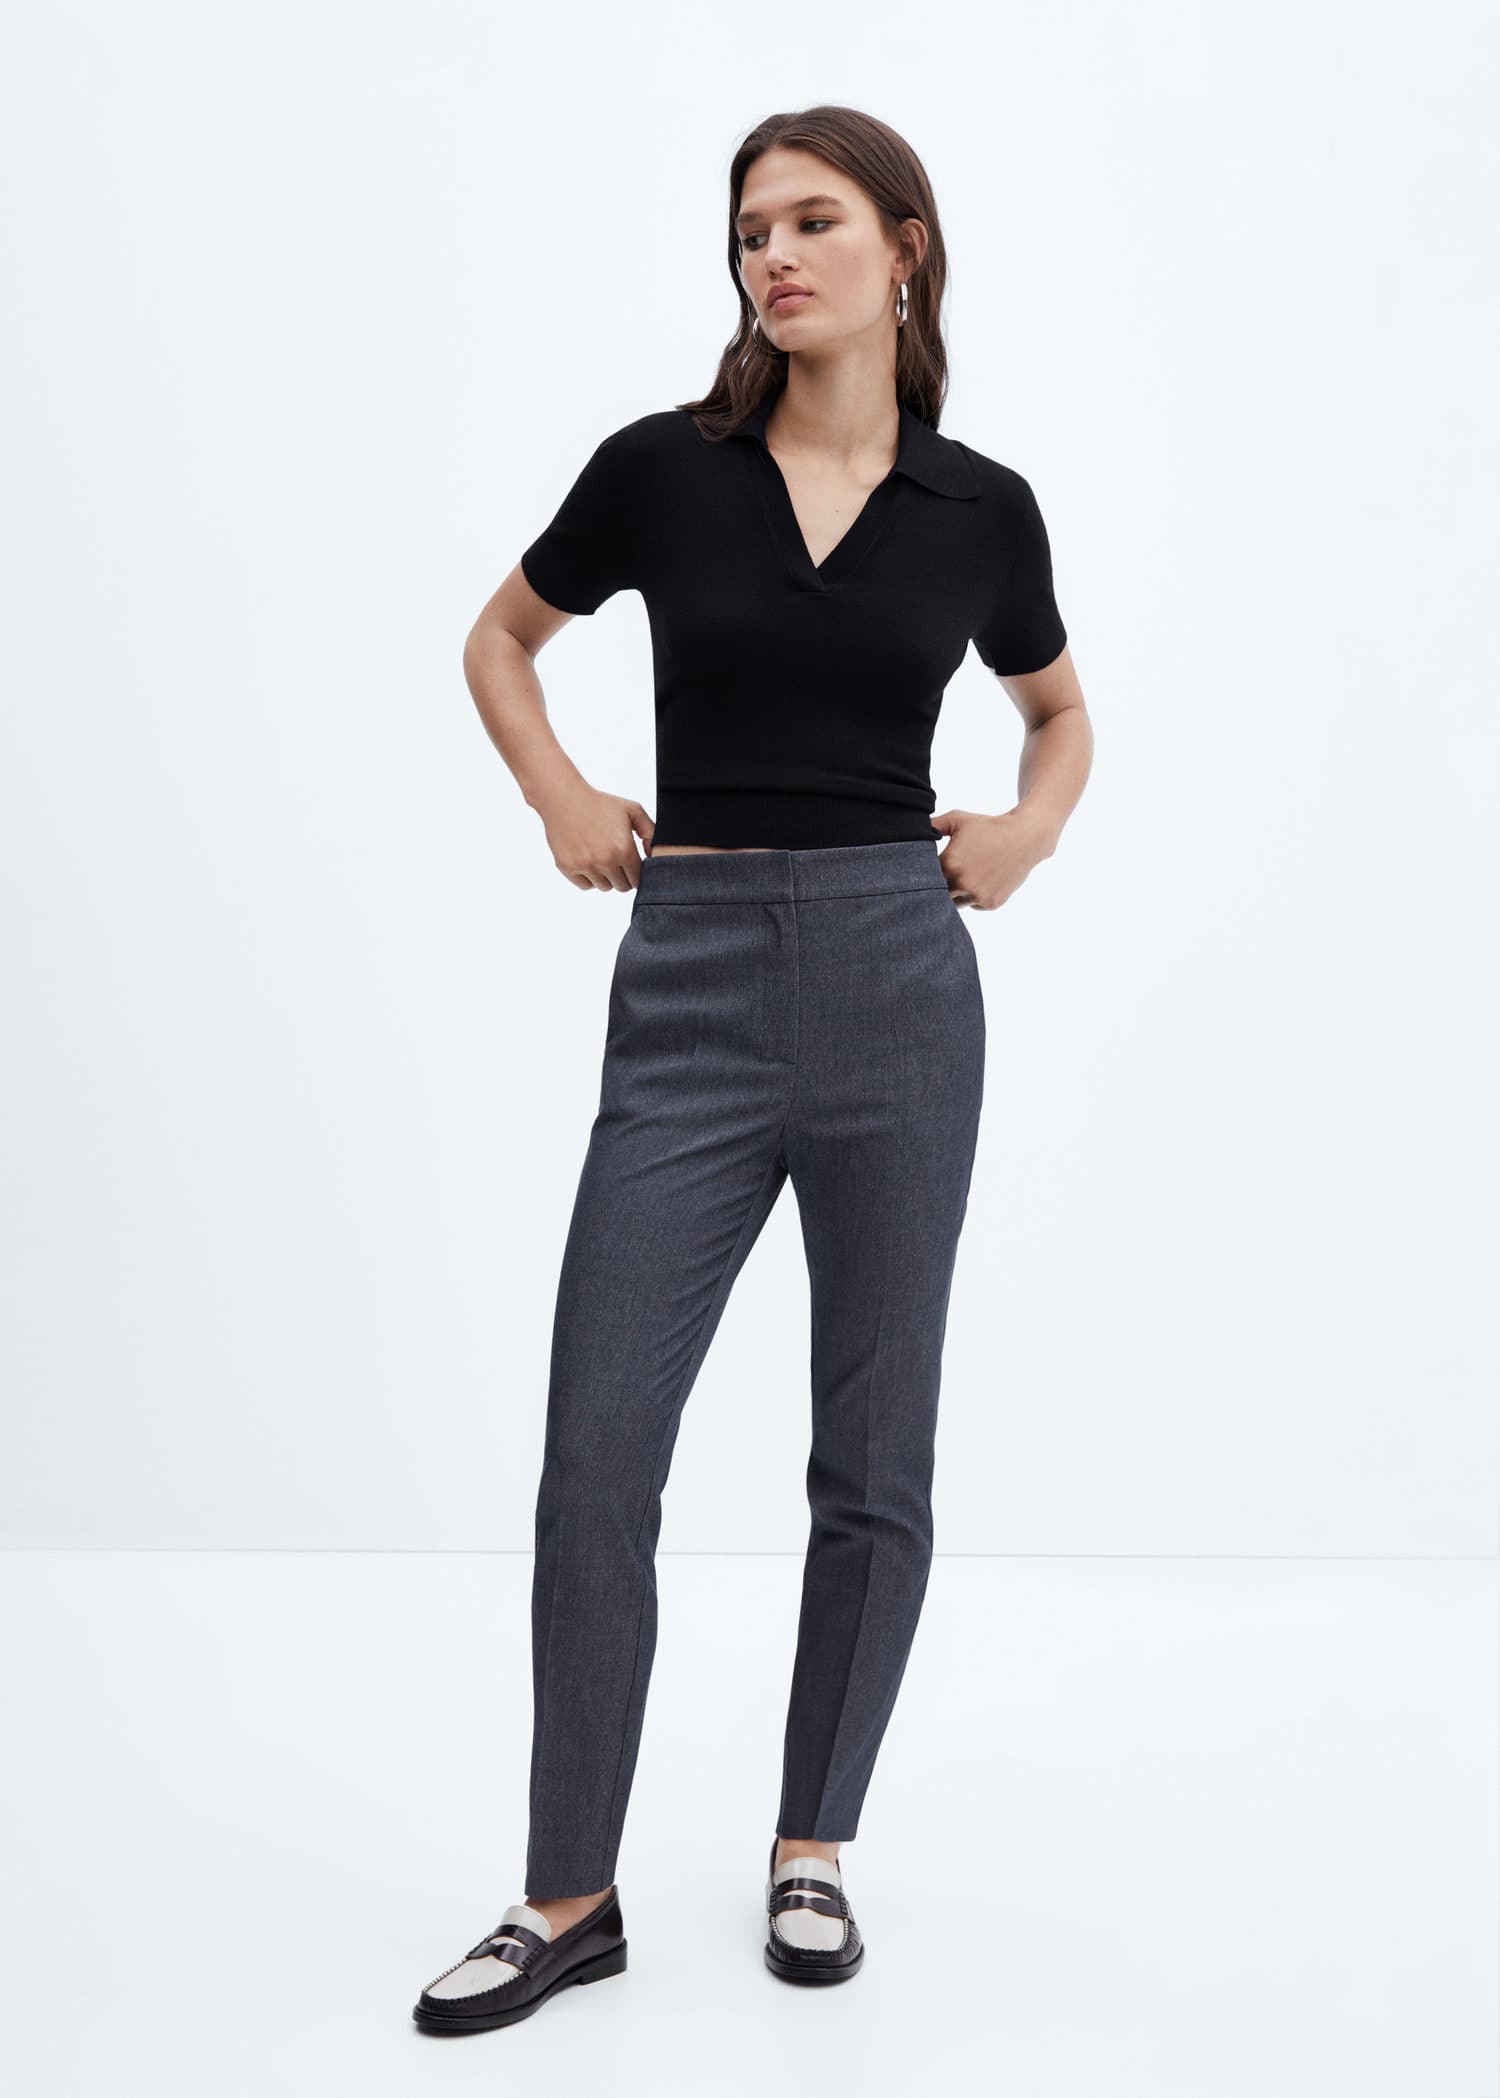 Mid-rise skinny trousers